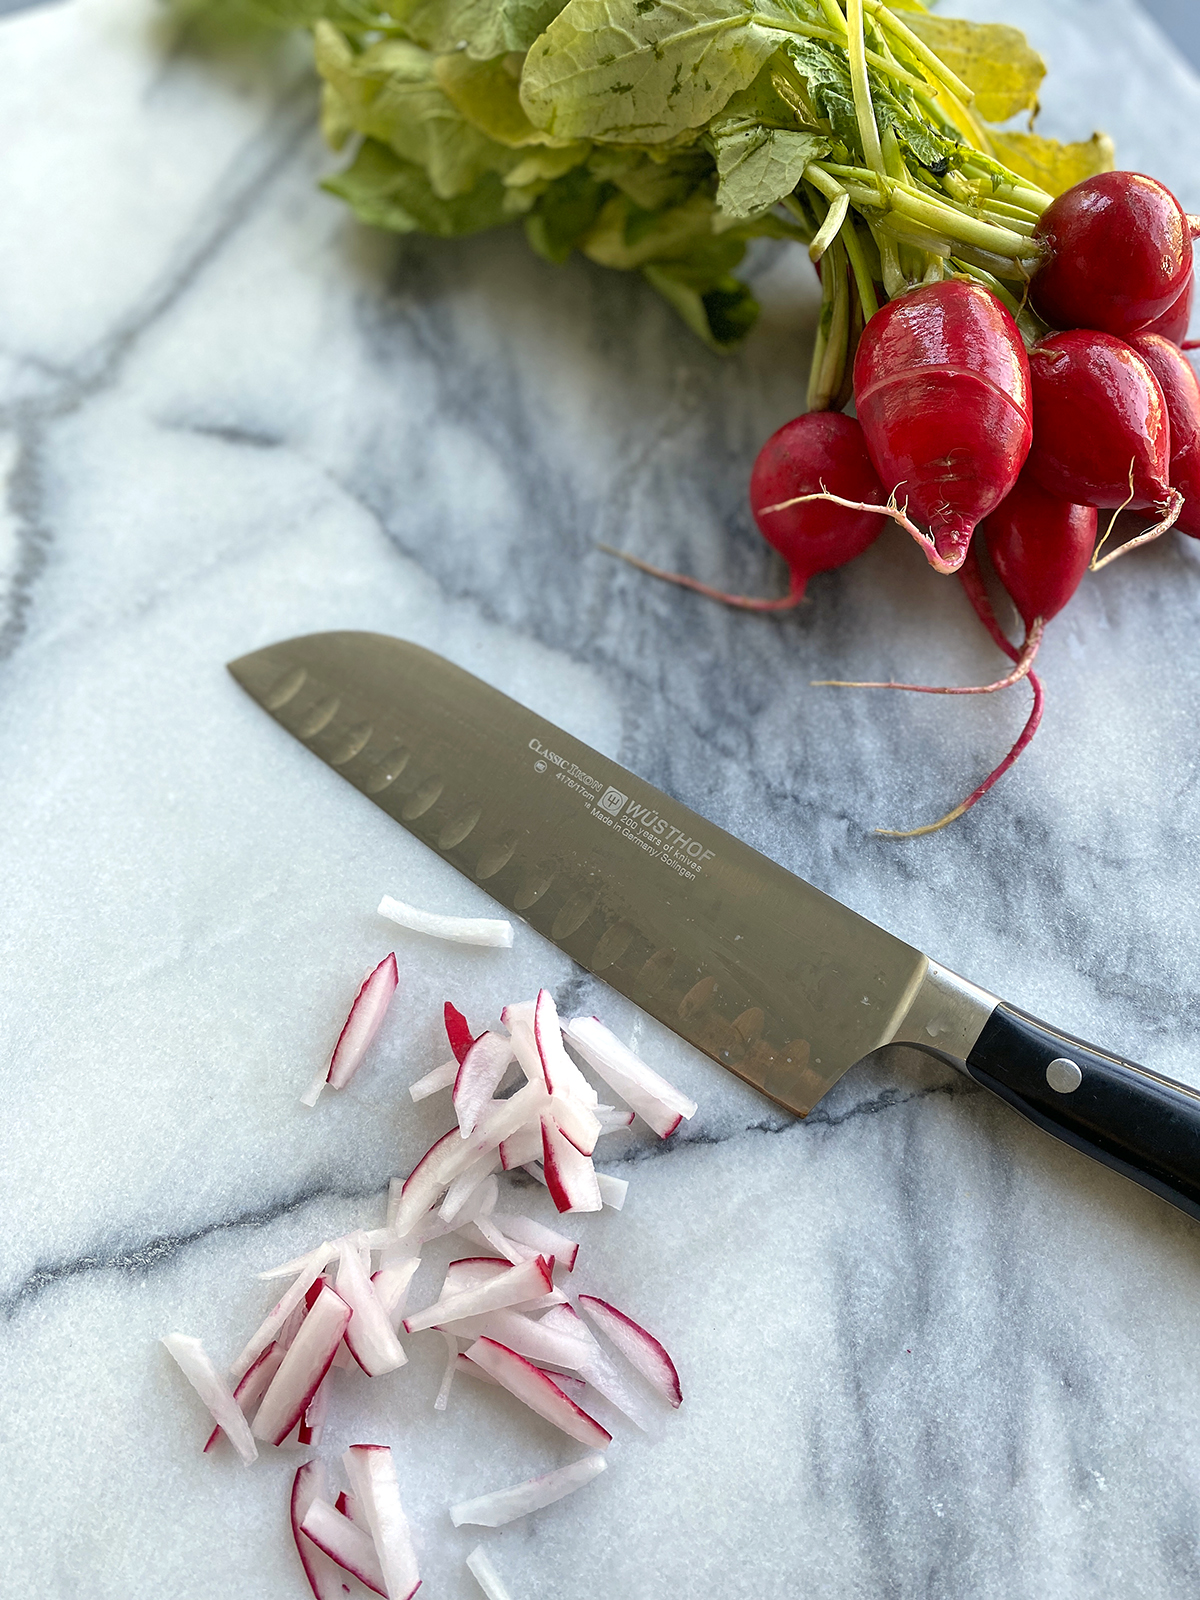 classic wusthof chef knife sitting next to chopped radish pile and a bunch of whole radishes on marble counter